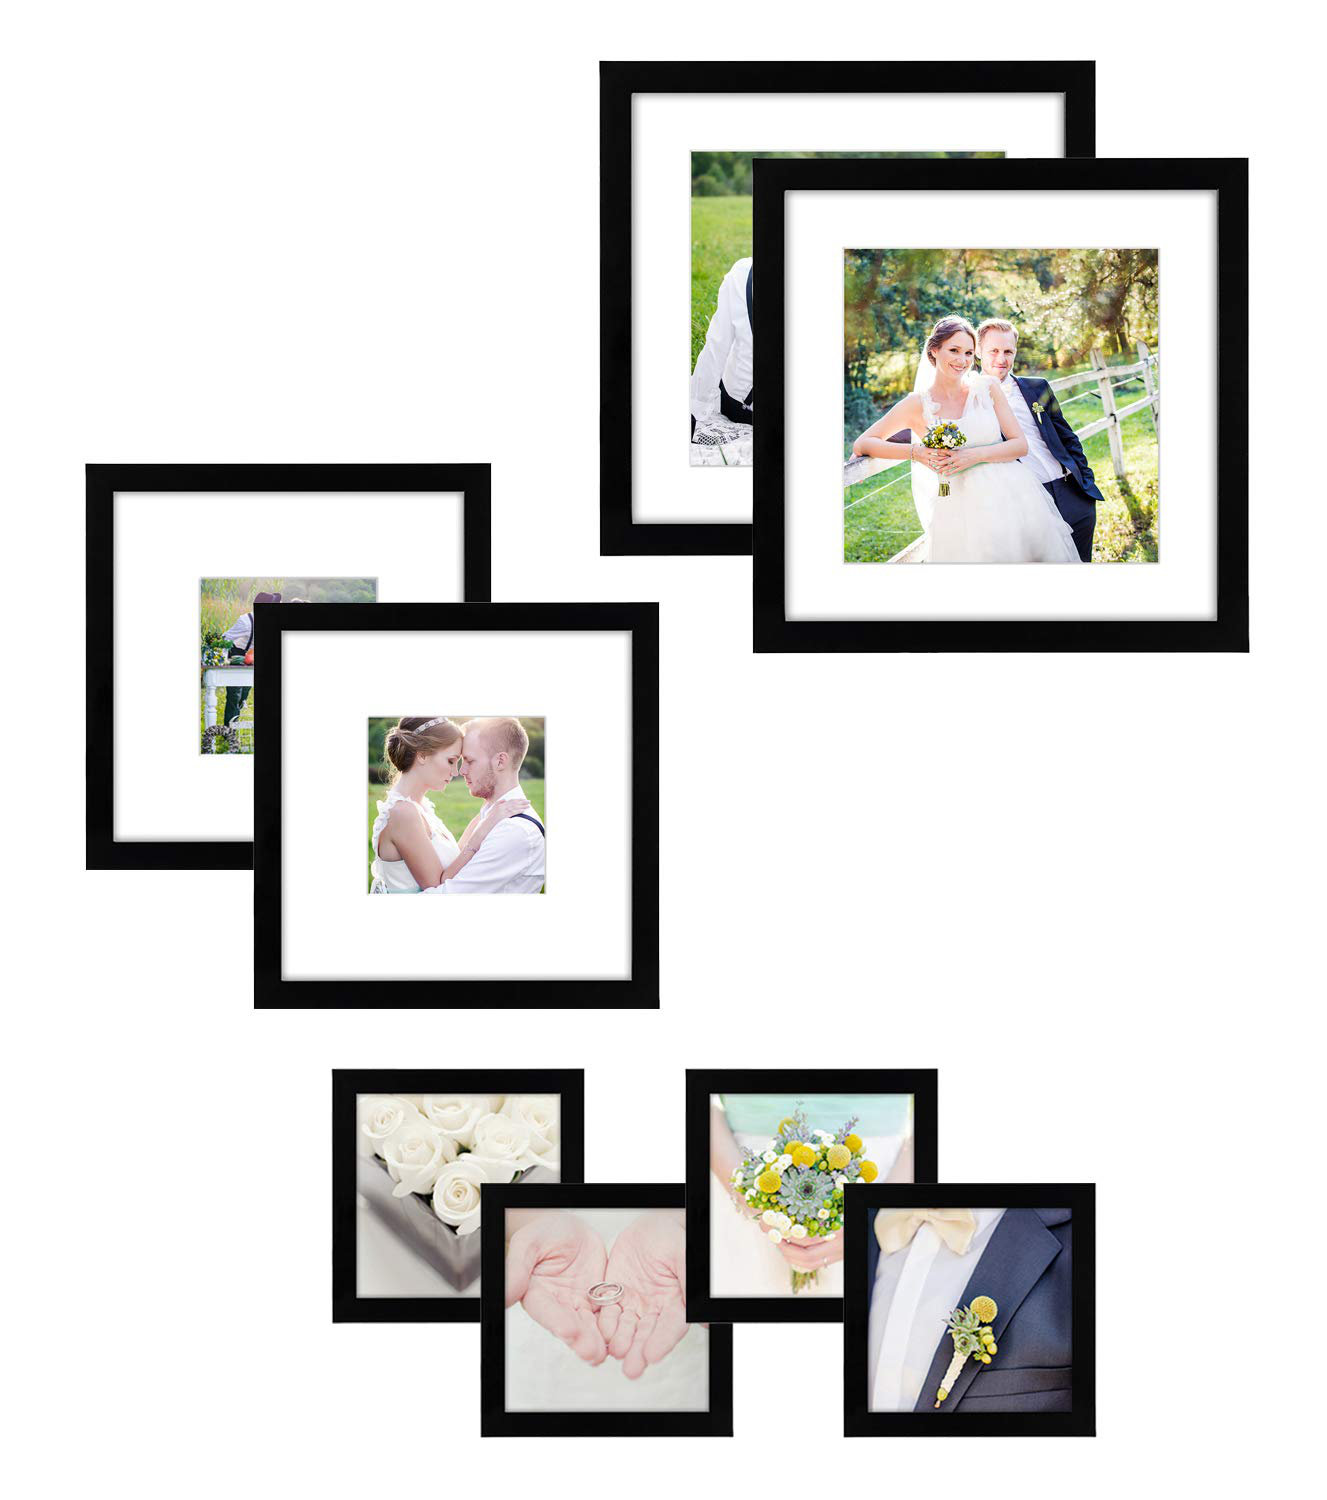 Set of 2 8x8 Picture Frame for Desk/ Wall Display Great for Baby